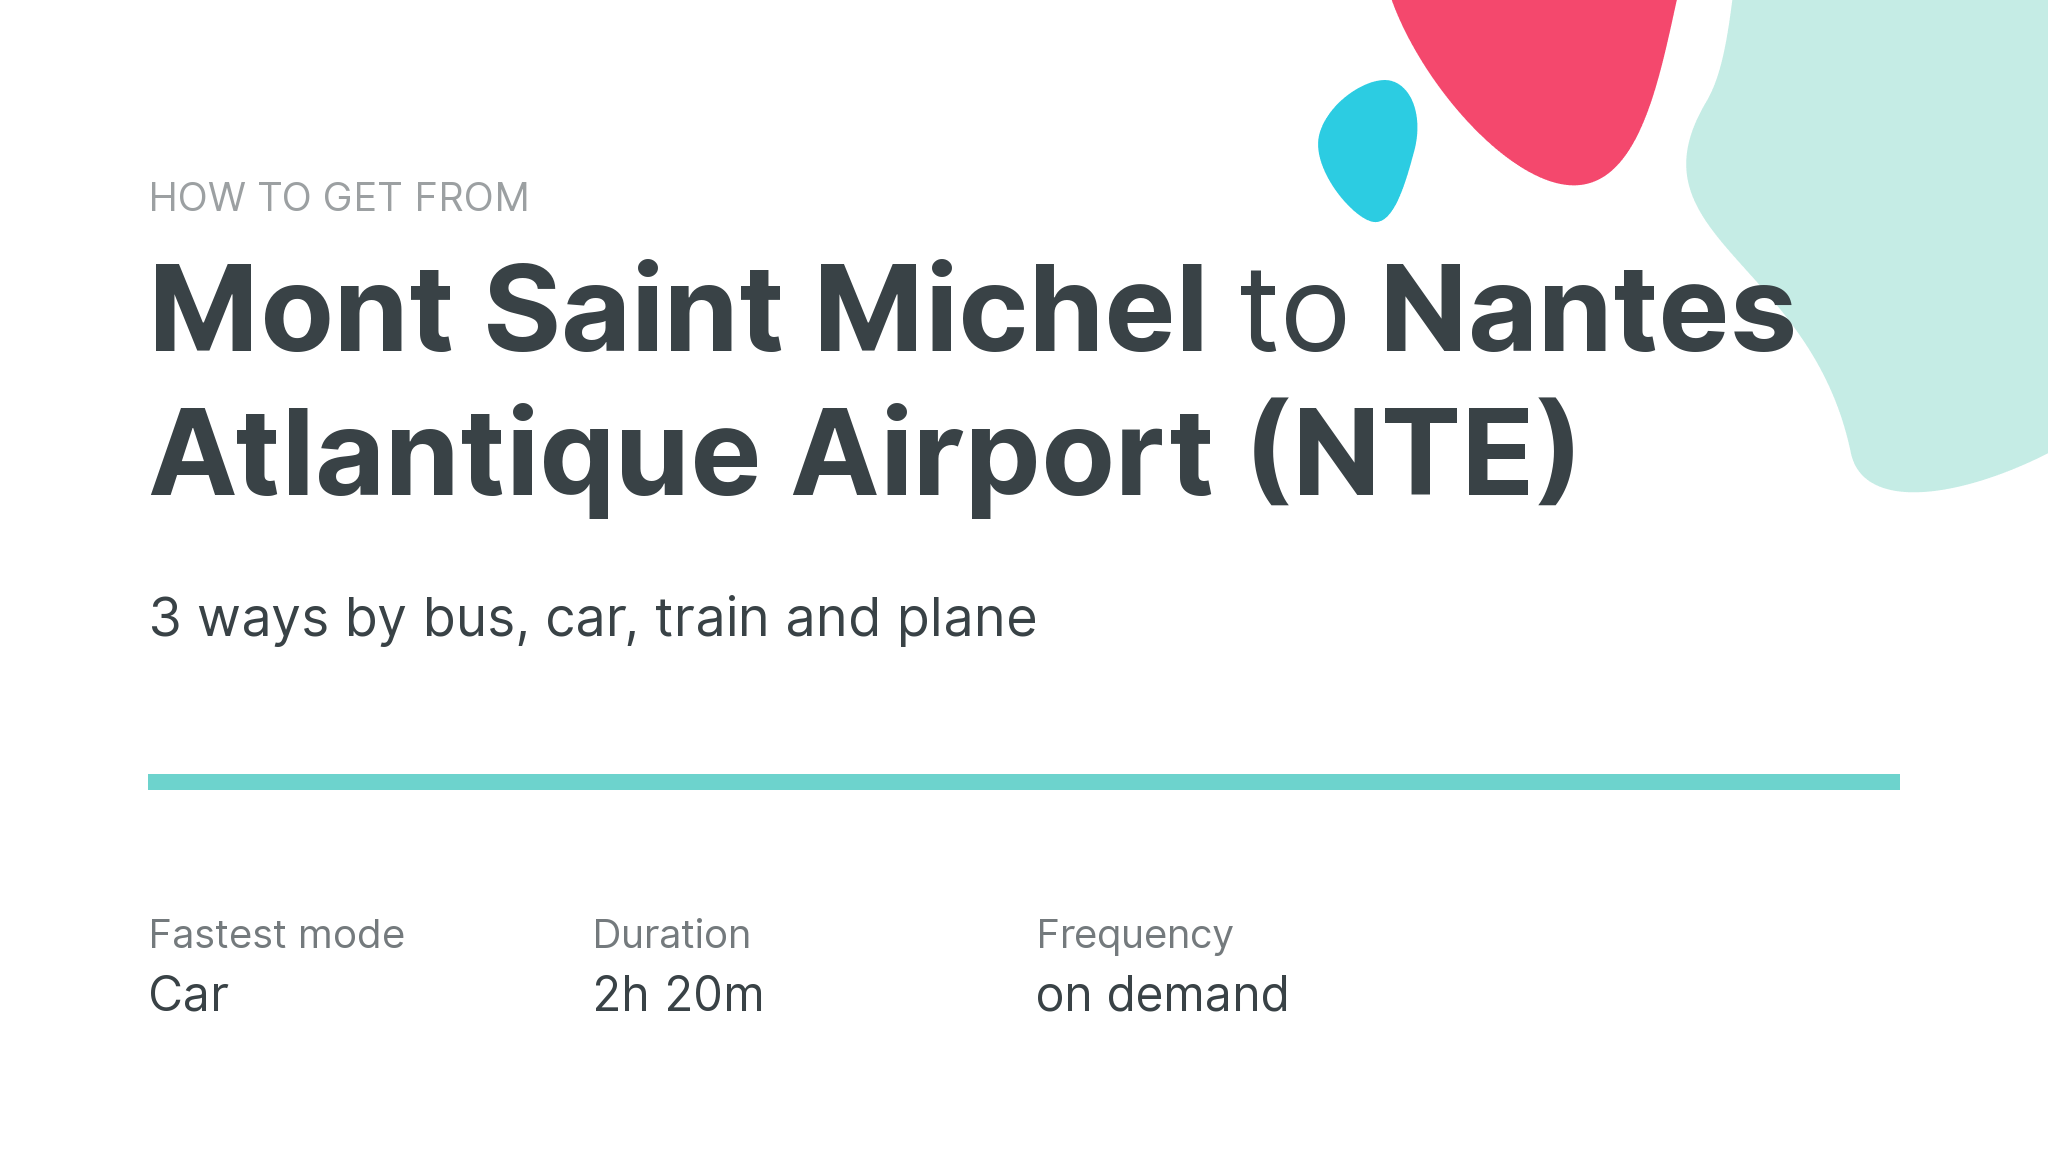 How do I get from Mont Saint Michel to Nantes Atlantique Airport (NTE)